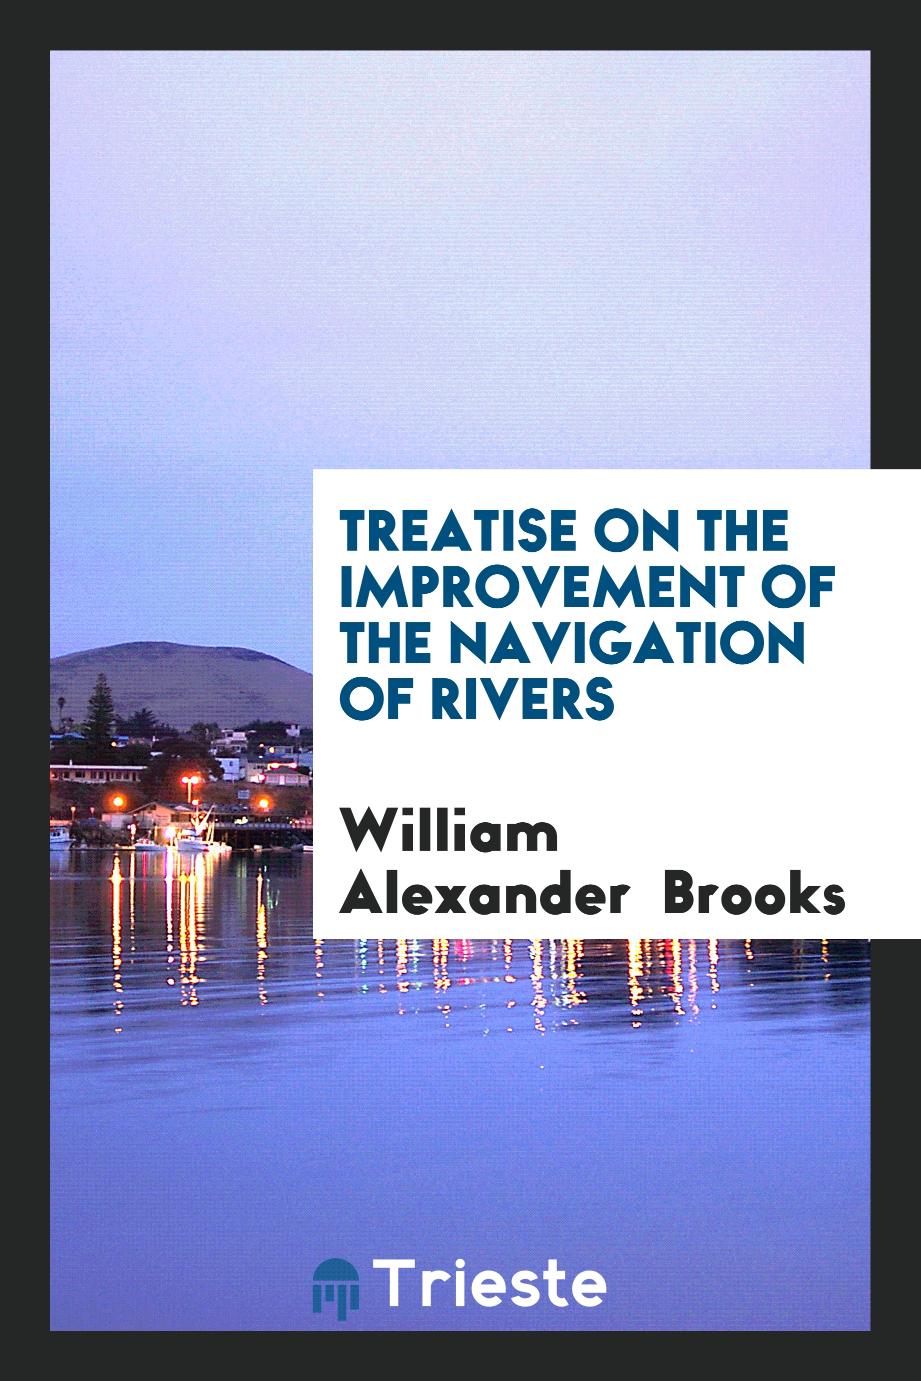 Treatise on the Improvement of the Navigation of Rivers